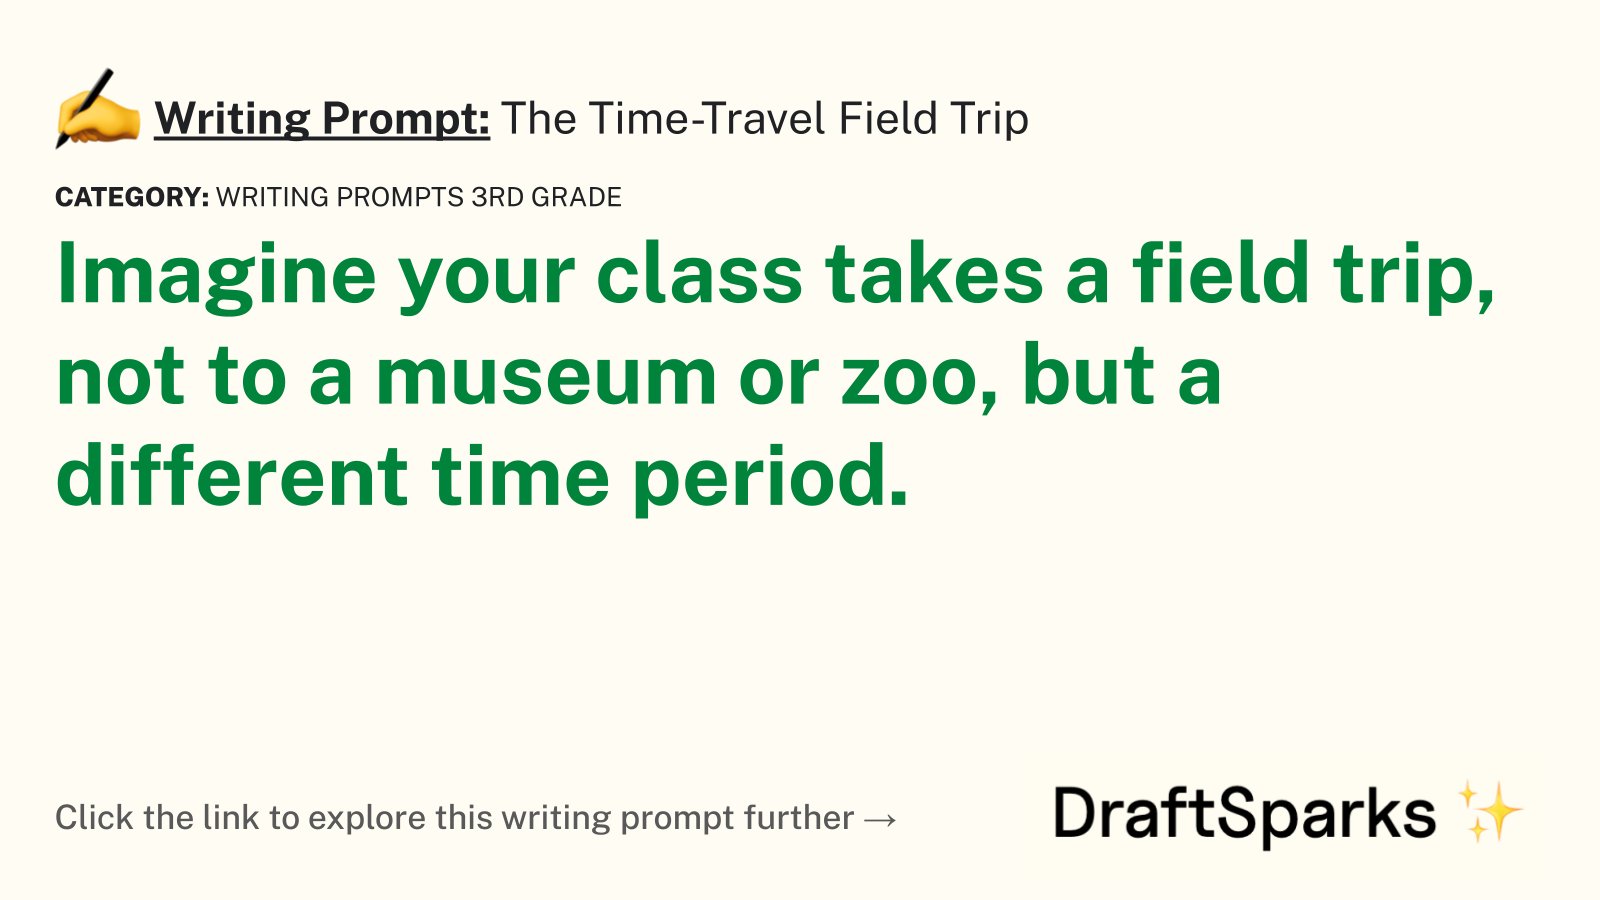 The Time-Travel Field Trip